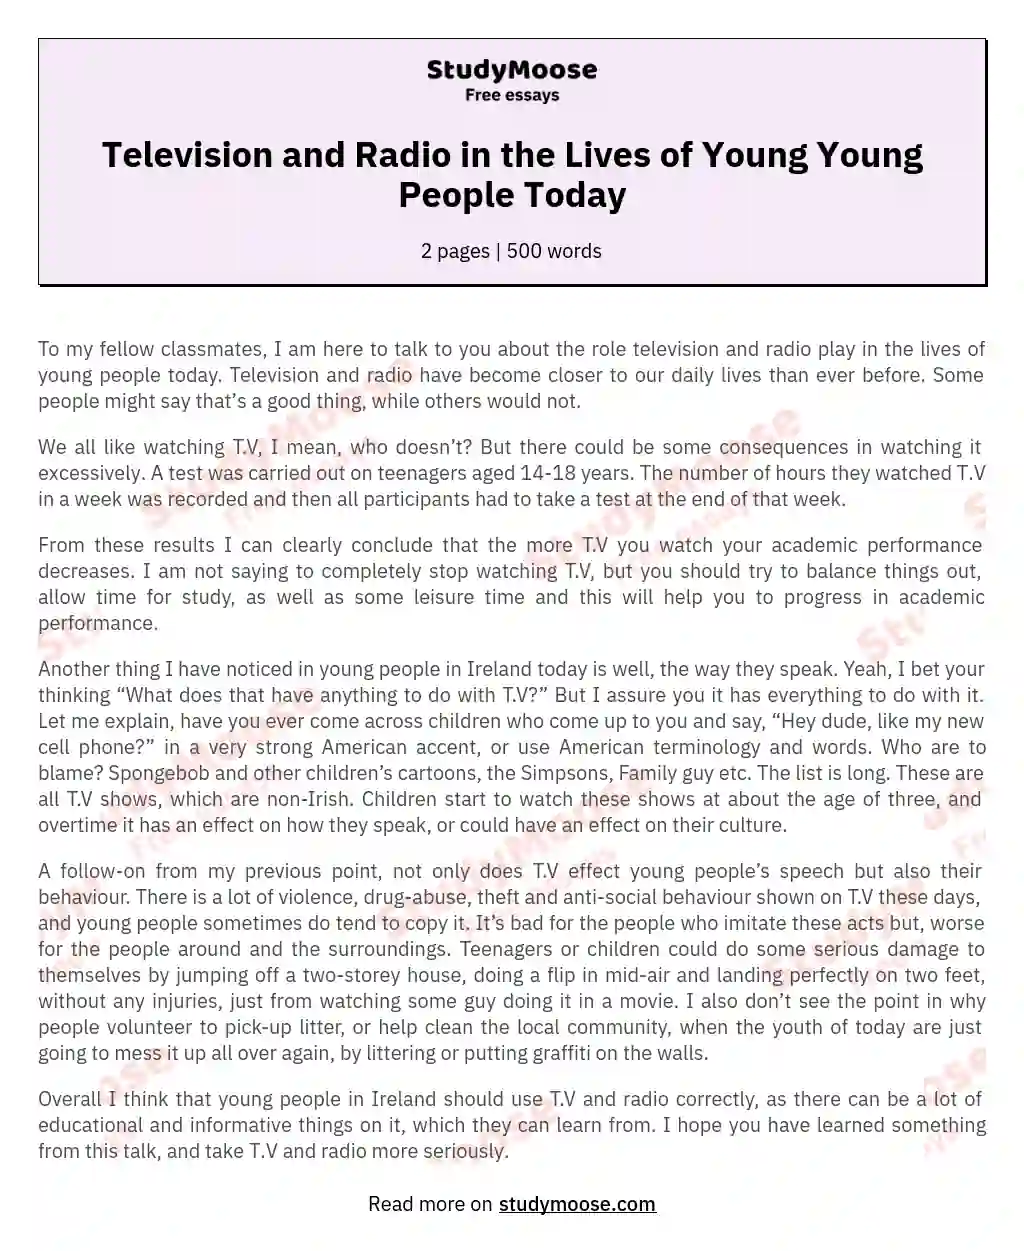 Television and Radio in the Lives of Young Young People Today